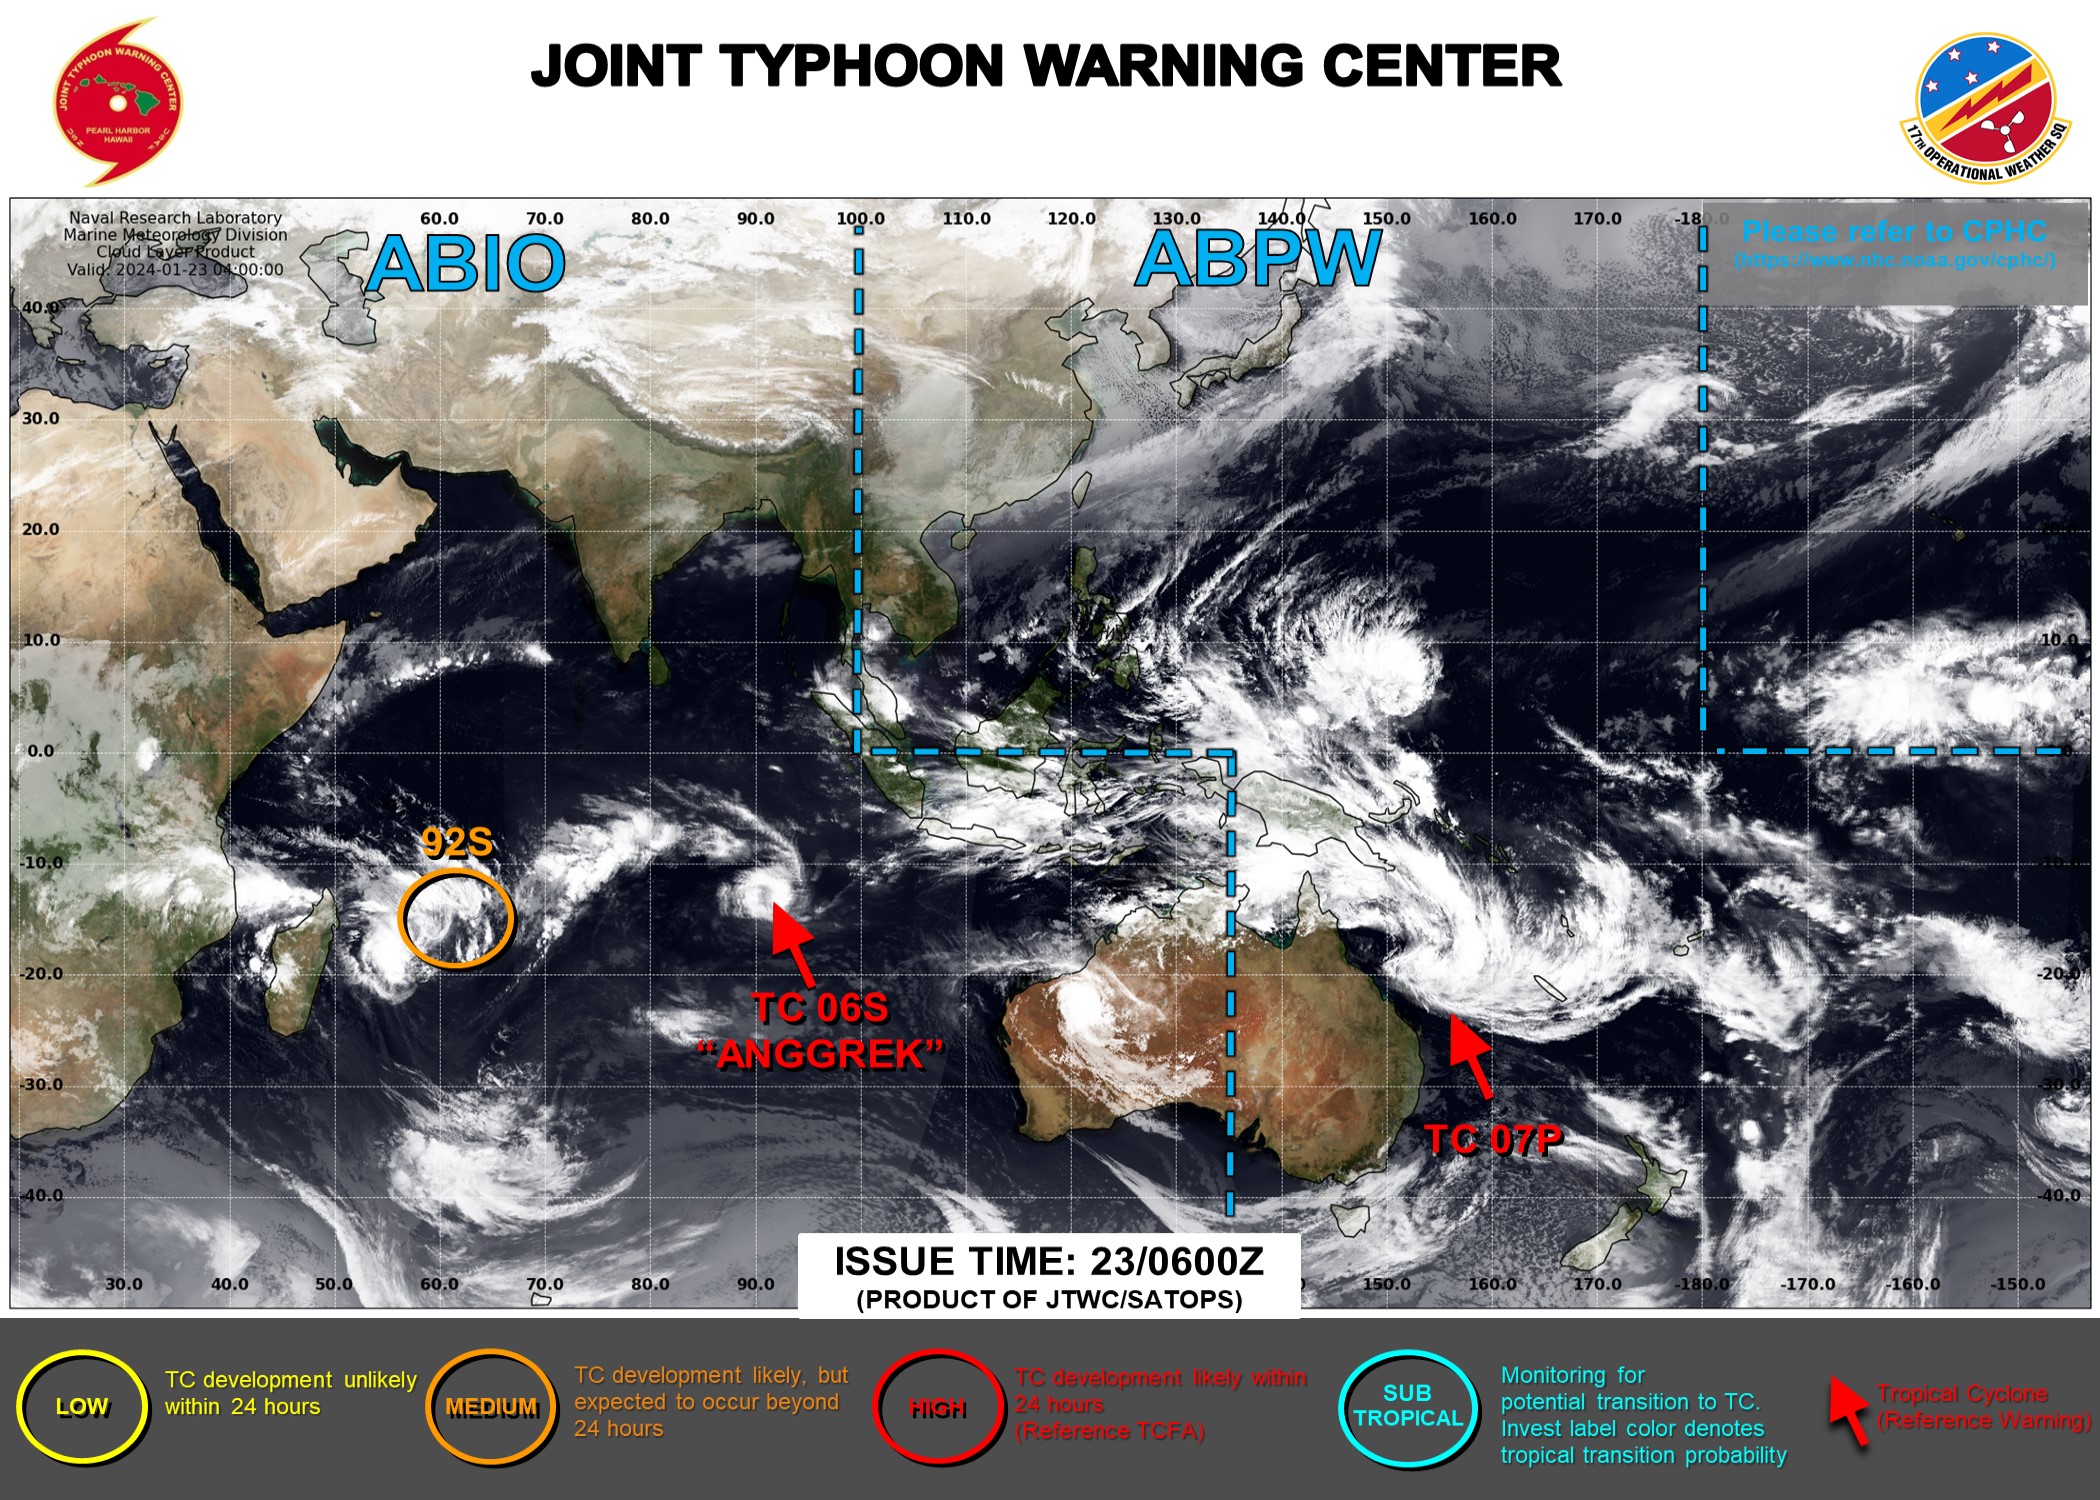 JTWC IS ISSUING 6HOURLY WARNINGS AND 3HOURLY SATELLITE BULLETINS TC 07P. 12HOURLY WARNINGS AND 3HOURLY SATELLITE BULLETINS ARE ISSUED ON TC 06S.